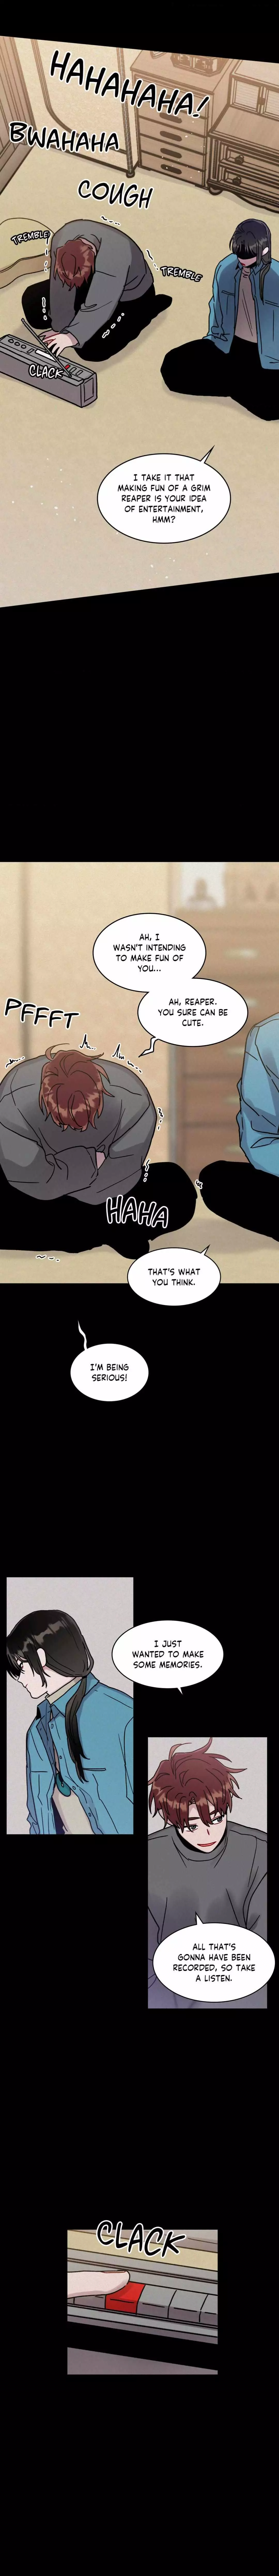 One Summer Day - 54 page 15-e24cb639